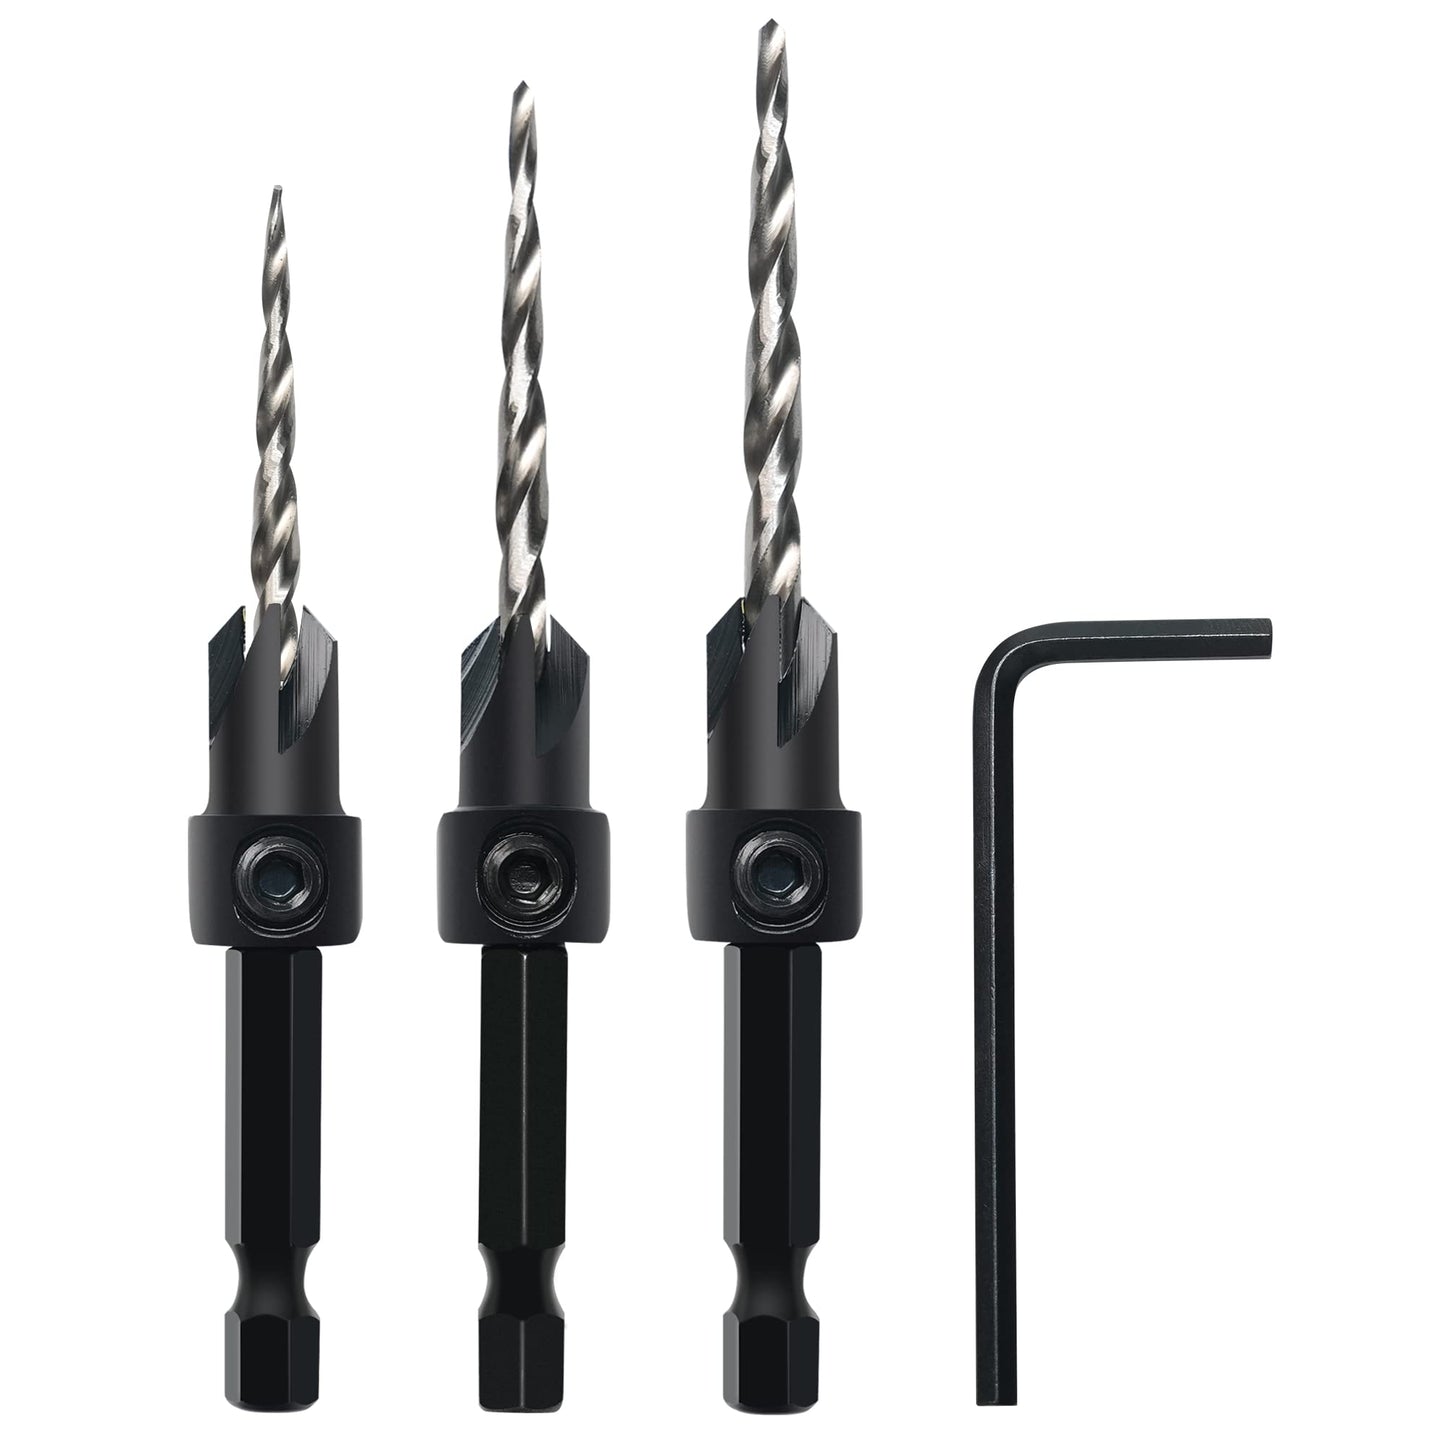 GMTOOLS Countersink Drill Bit Set, 3Pcs Tapered Drill Bits M2 HSS, with 1/4" Hex Shank Quick Change and Allen Wrench, Counter Sinker Set for